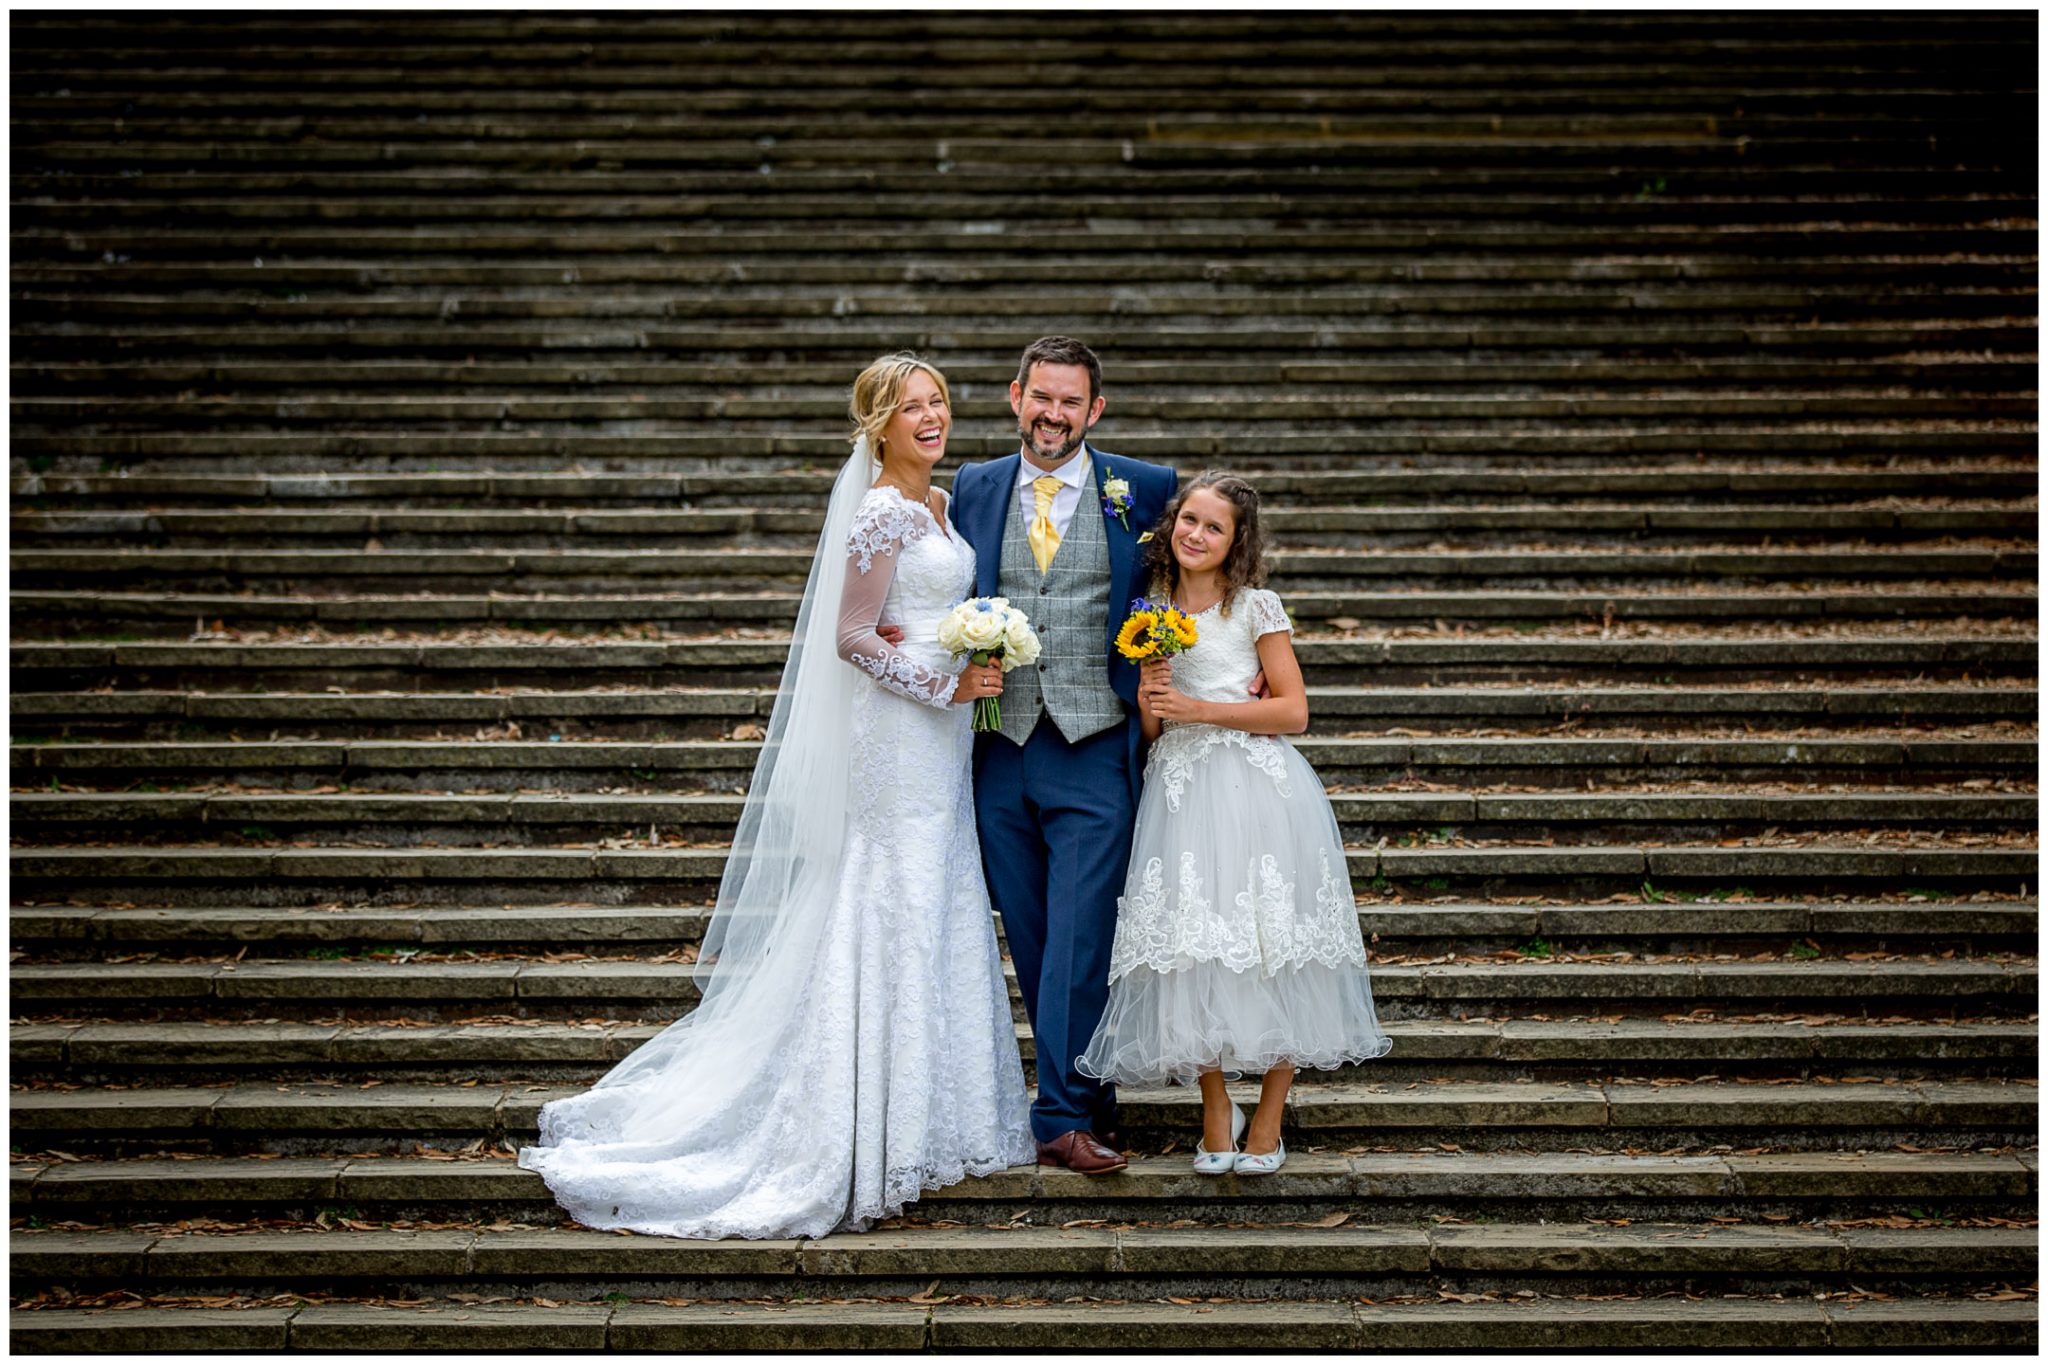 Family group wedding photo on Winchester law court steps